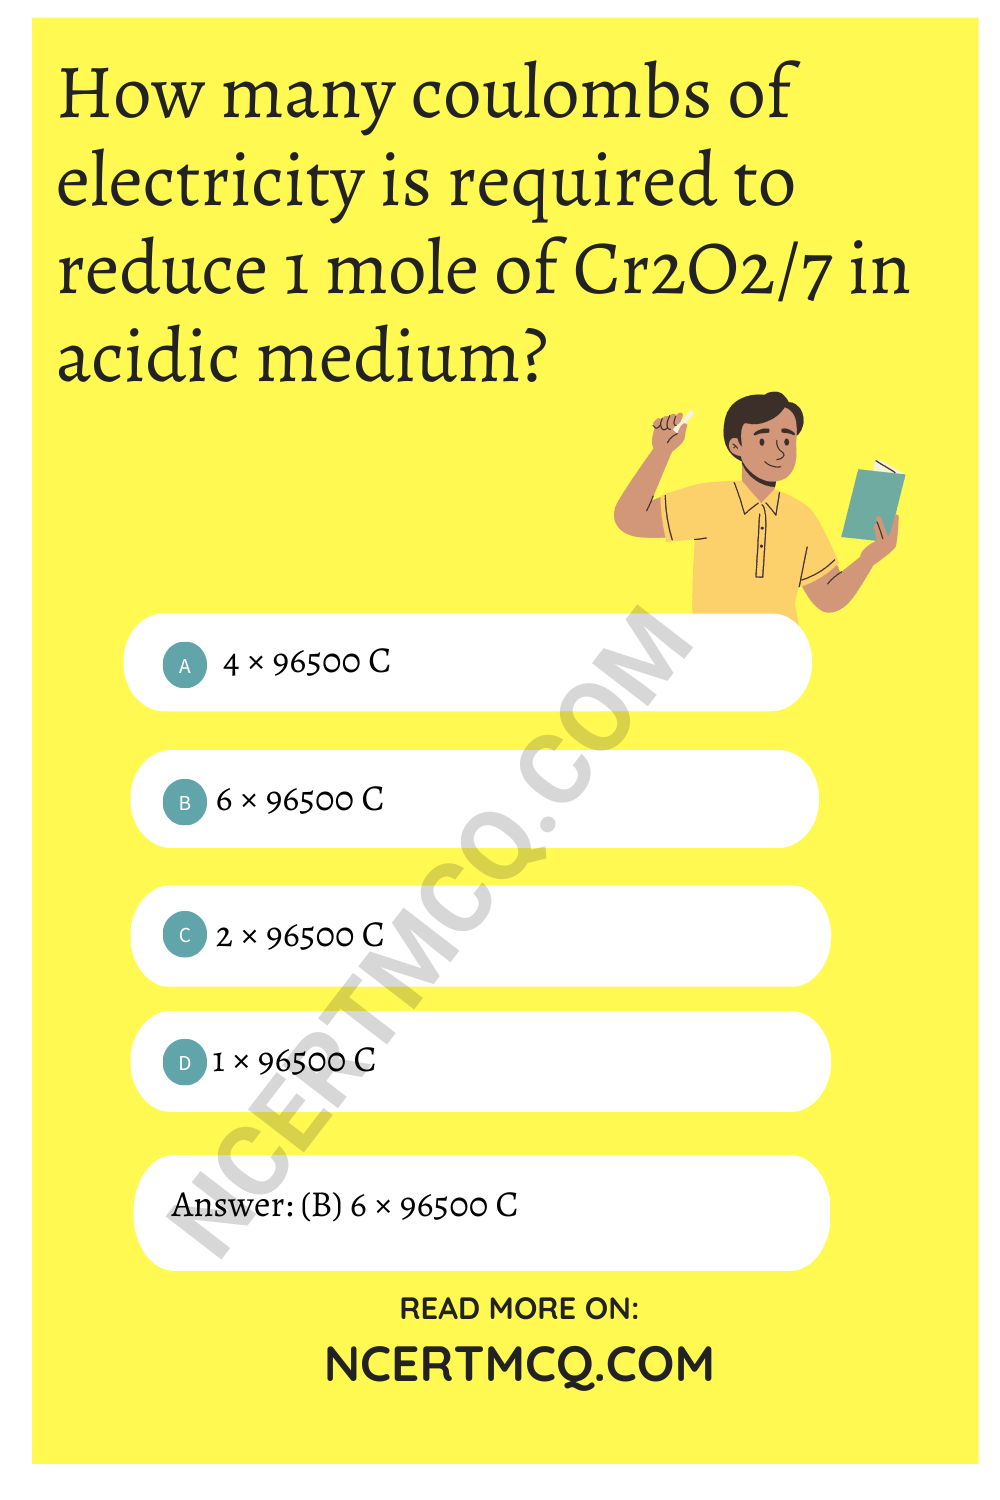 How many coulombs of electricity is required to reduce 1 mole of Cr2O2/7 in acidic medium?